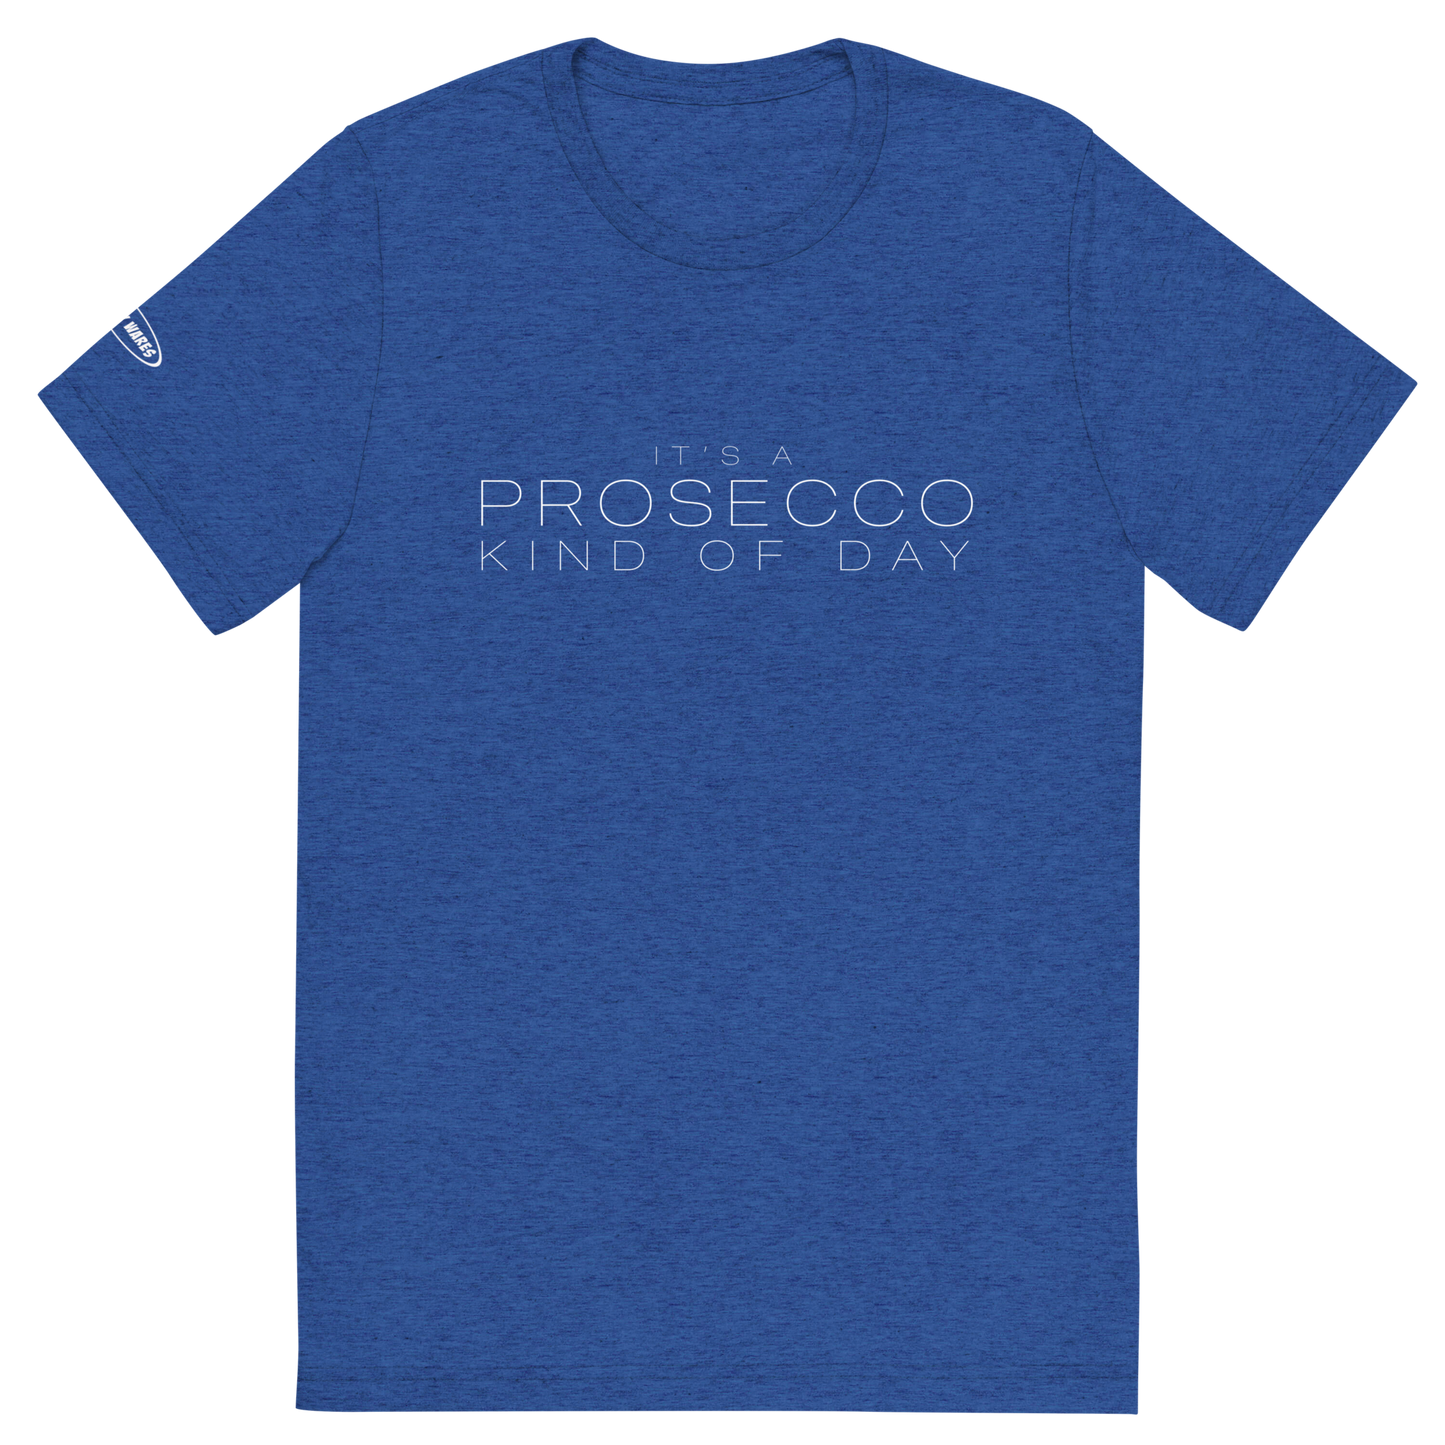 ALCOHOL - It's a Prosecco Kind of Day - Funny T-Shirt